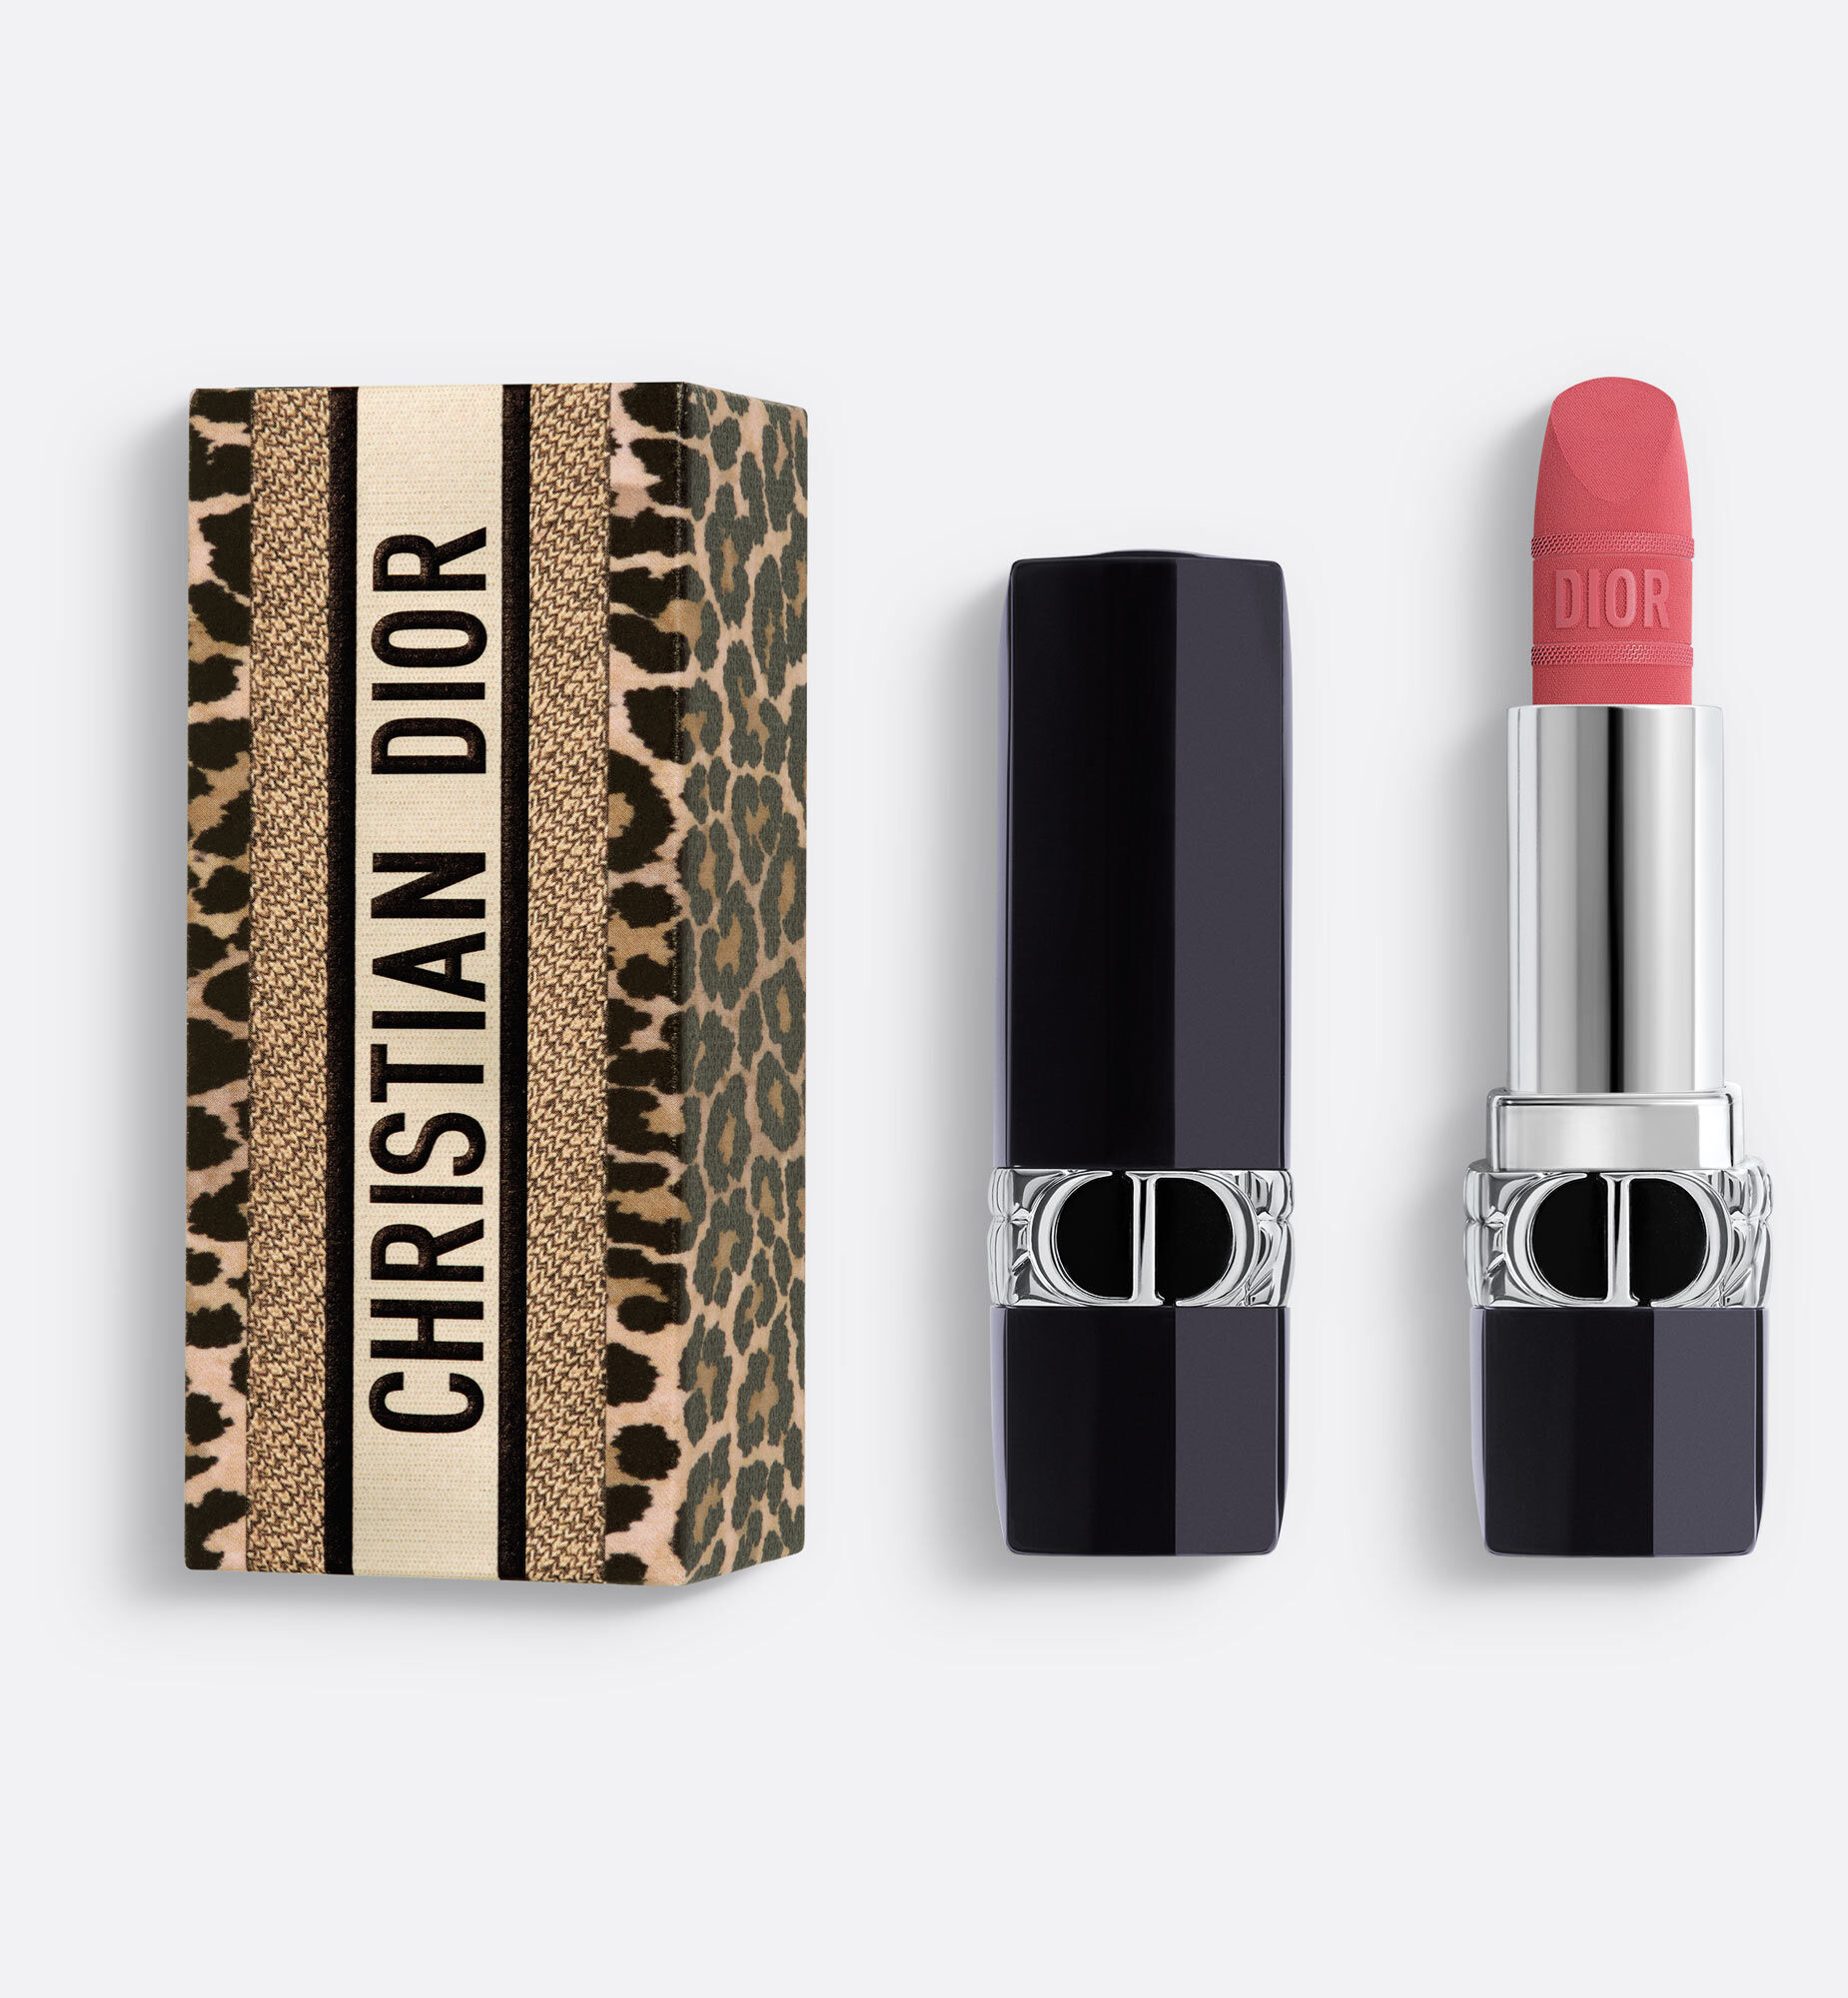 Dior  NEW Rouge Dior Refillable Lipstick Review and Swatches  The  Happy Sloths Beauty Makeup and Skincare Blog with Reviews and Swatches